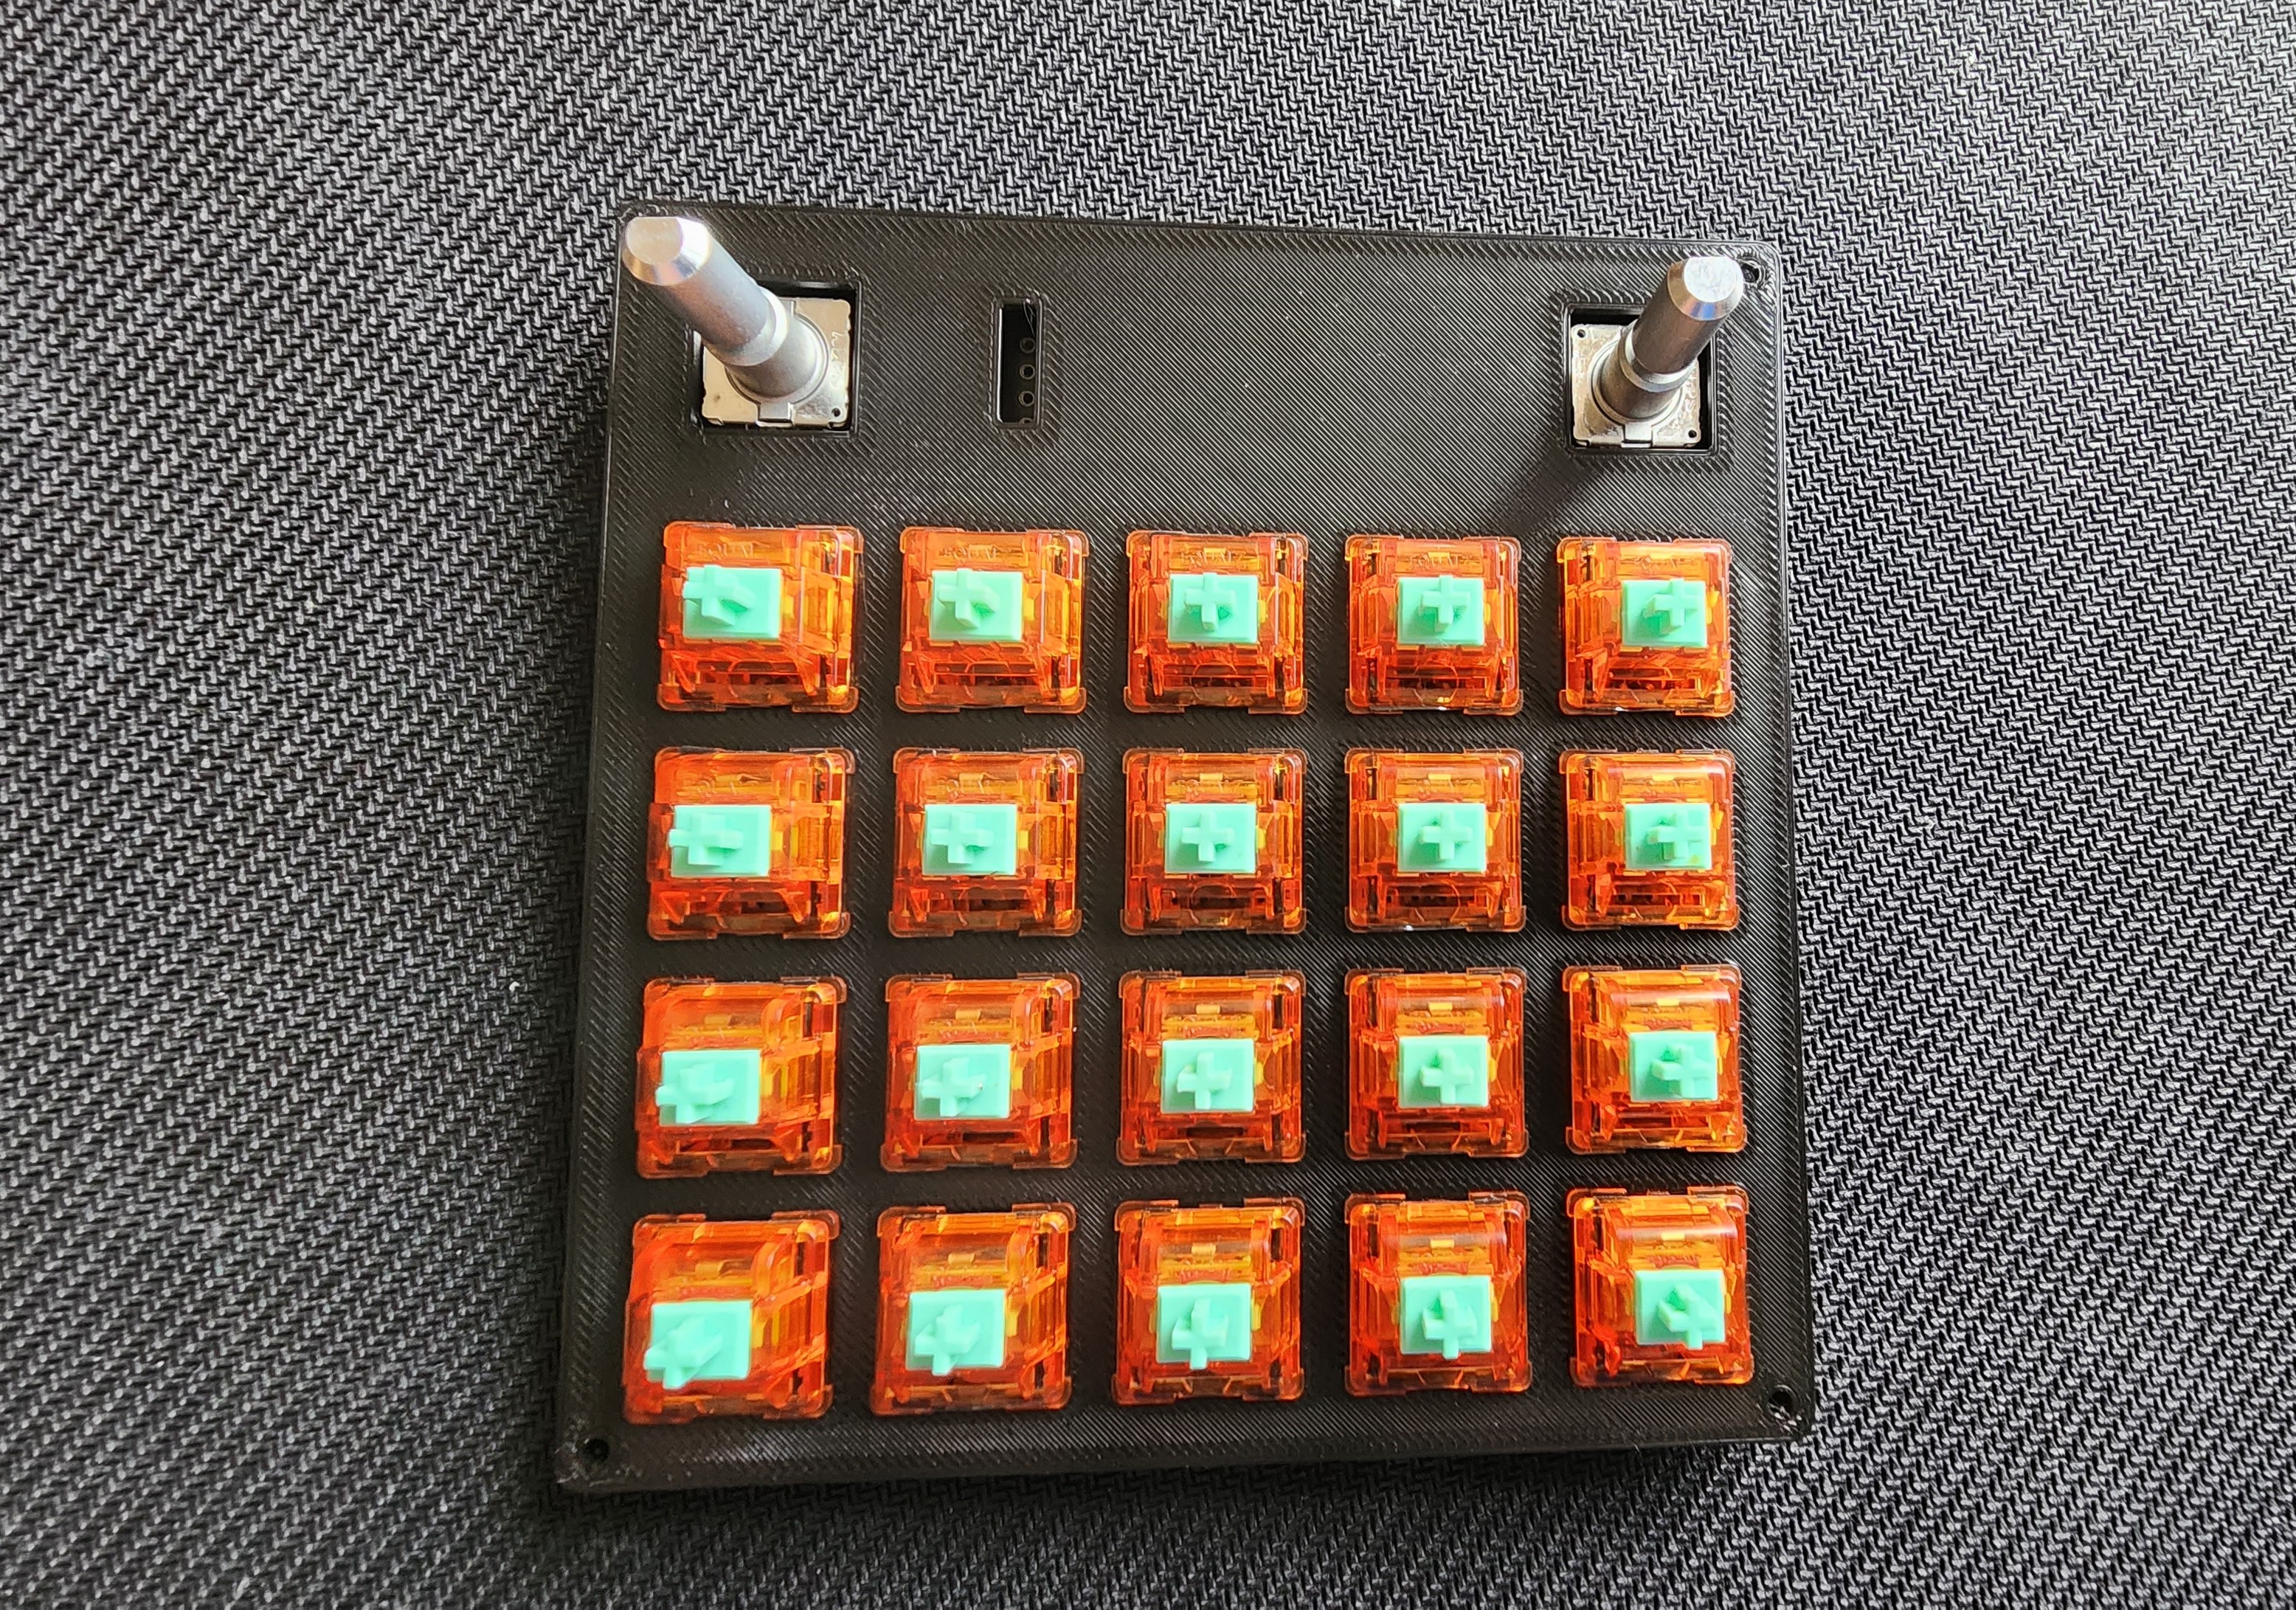 Switches Inserted